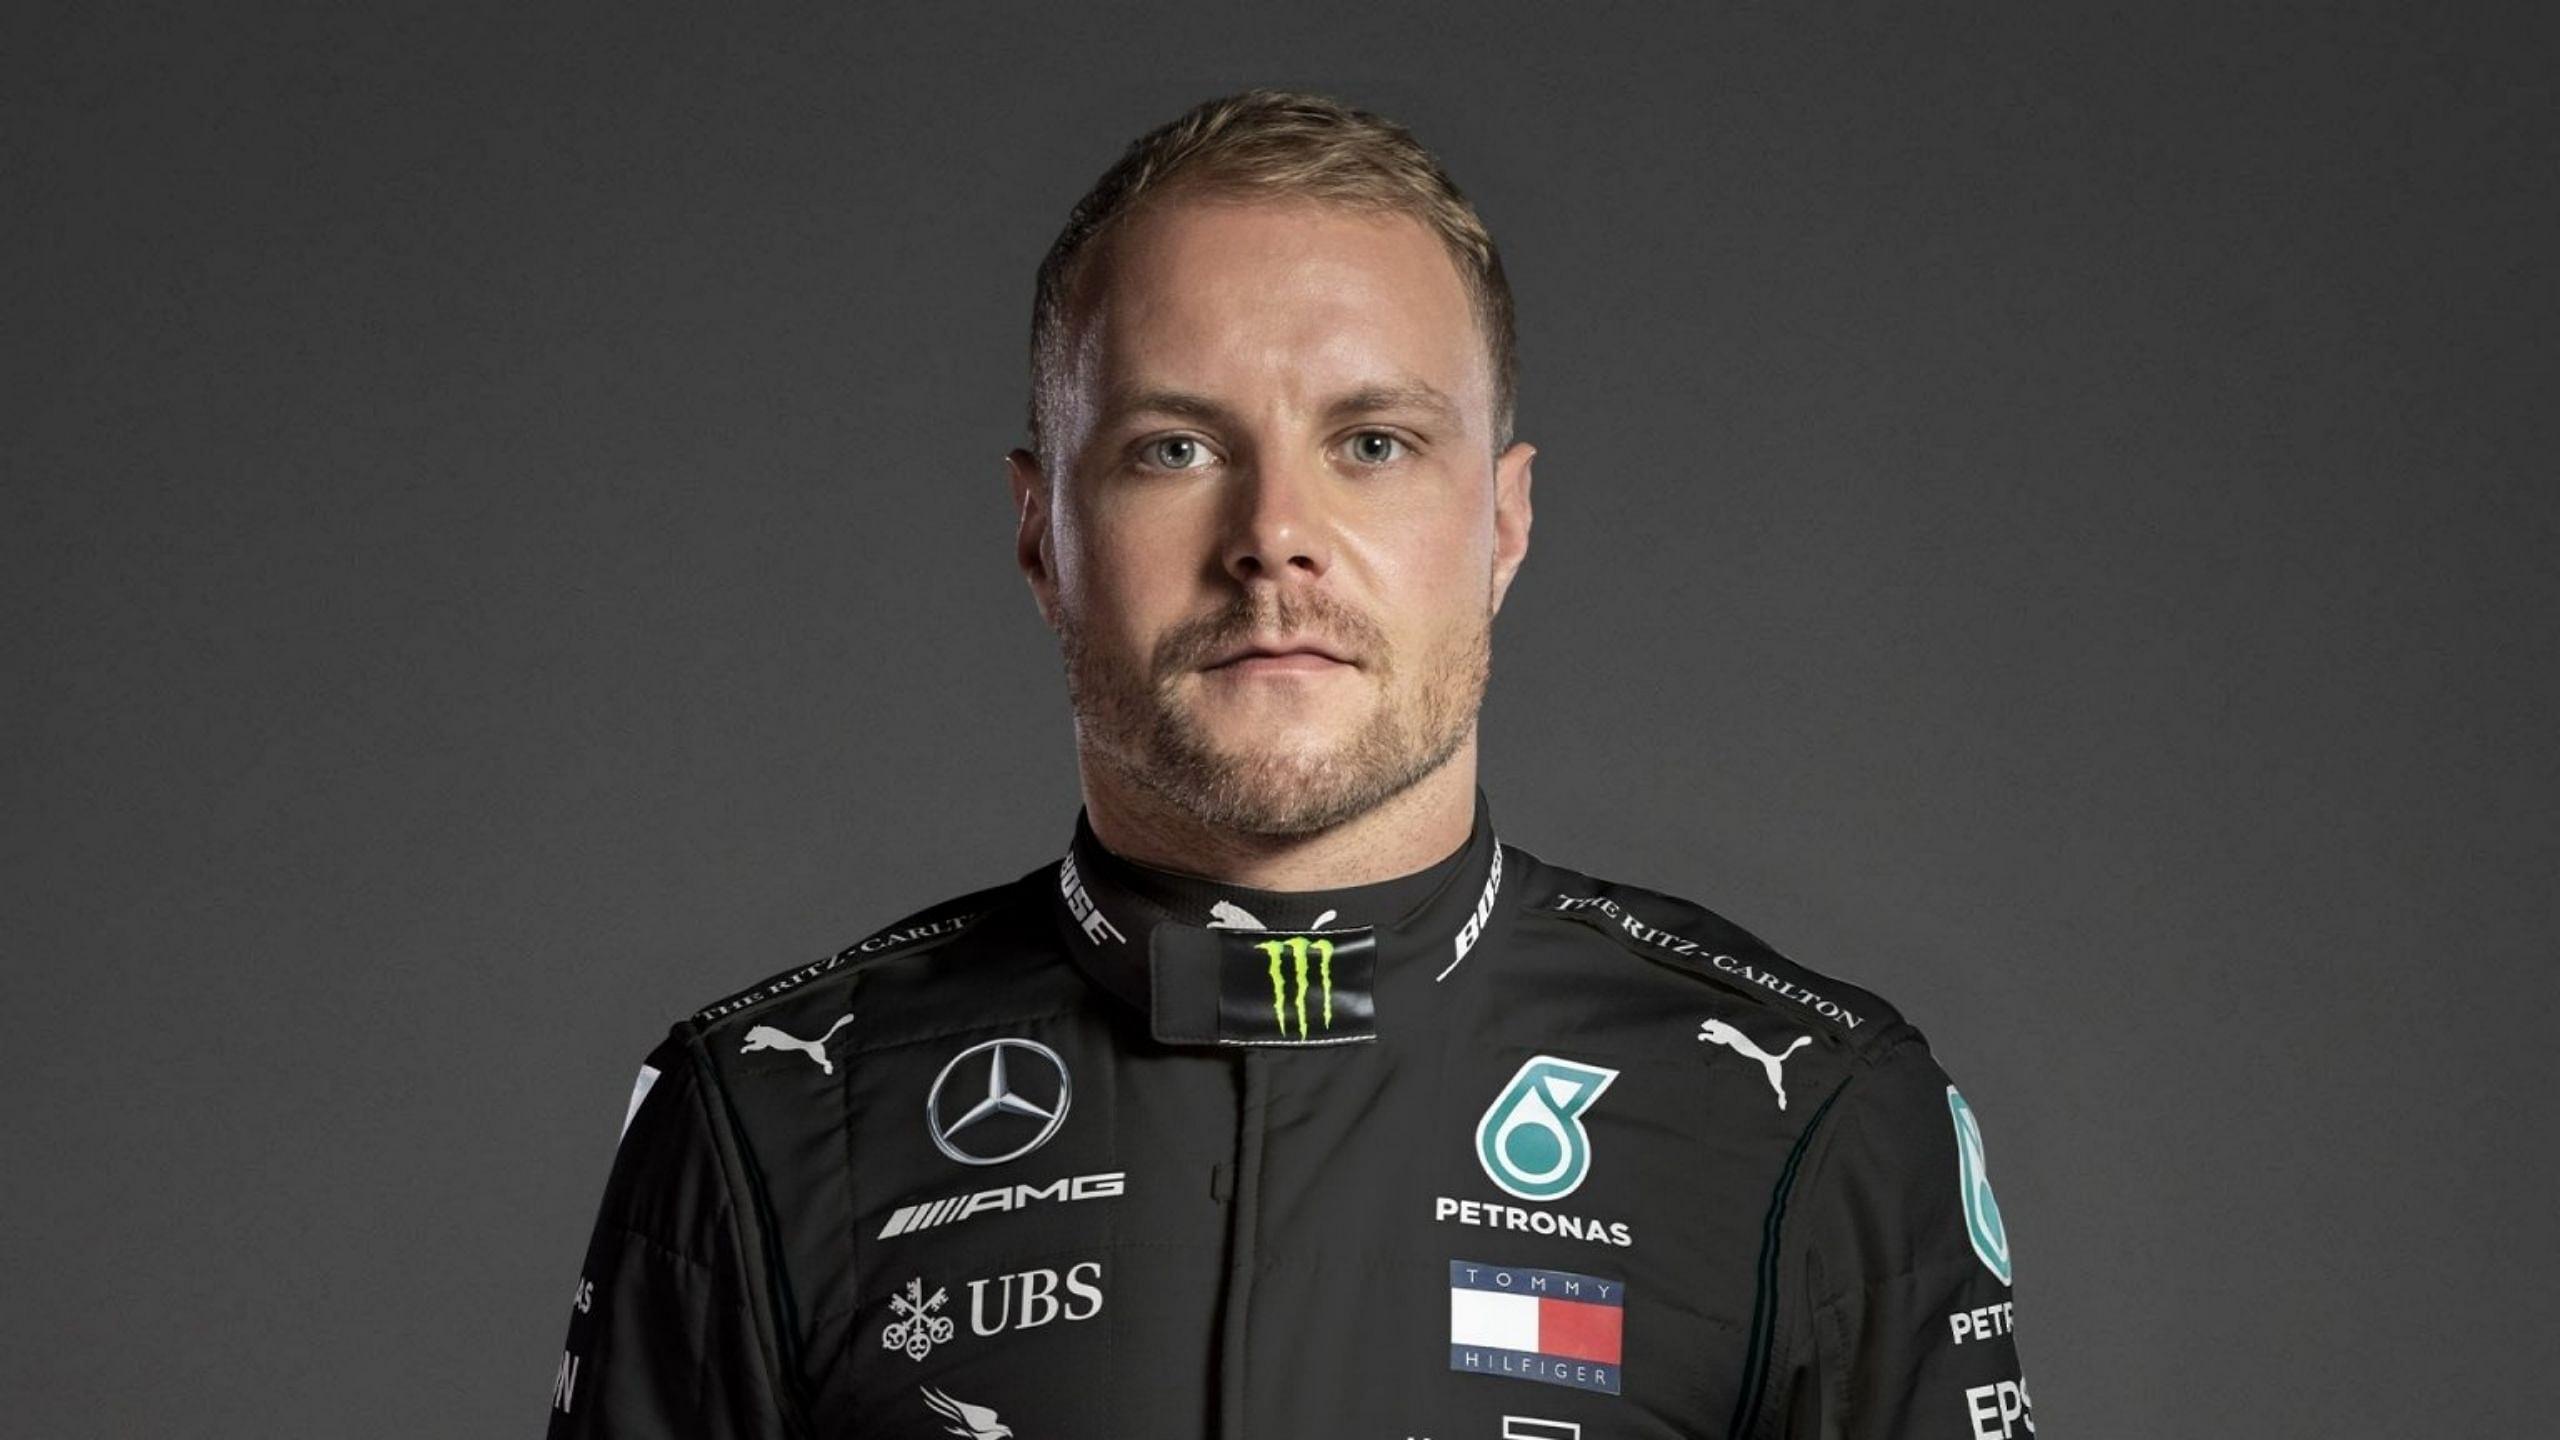 “It was a disaster race for me” - Valtteri Bottas on spinning six times at Turkish Grand Prix